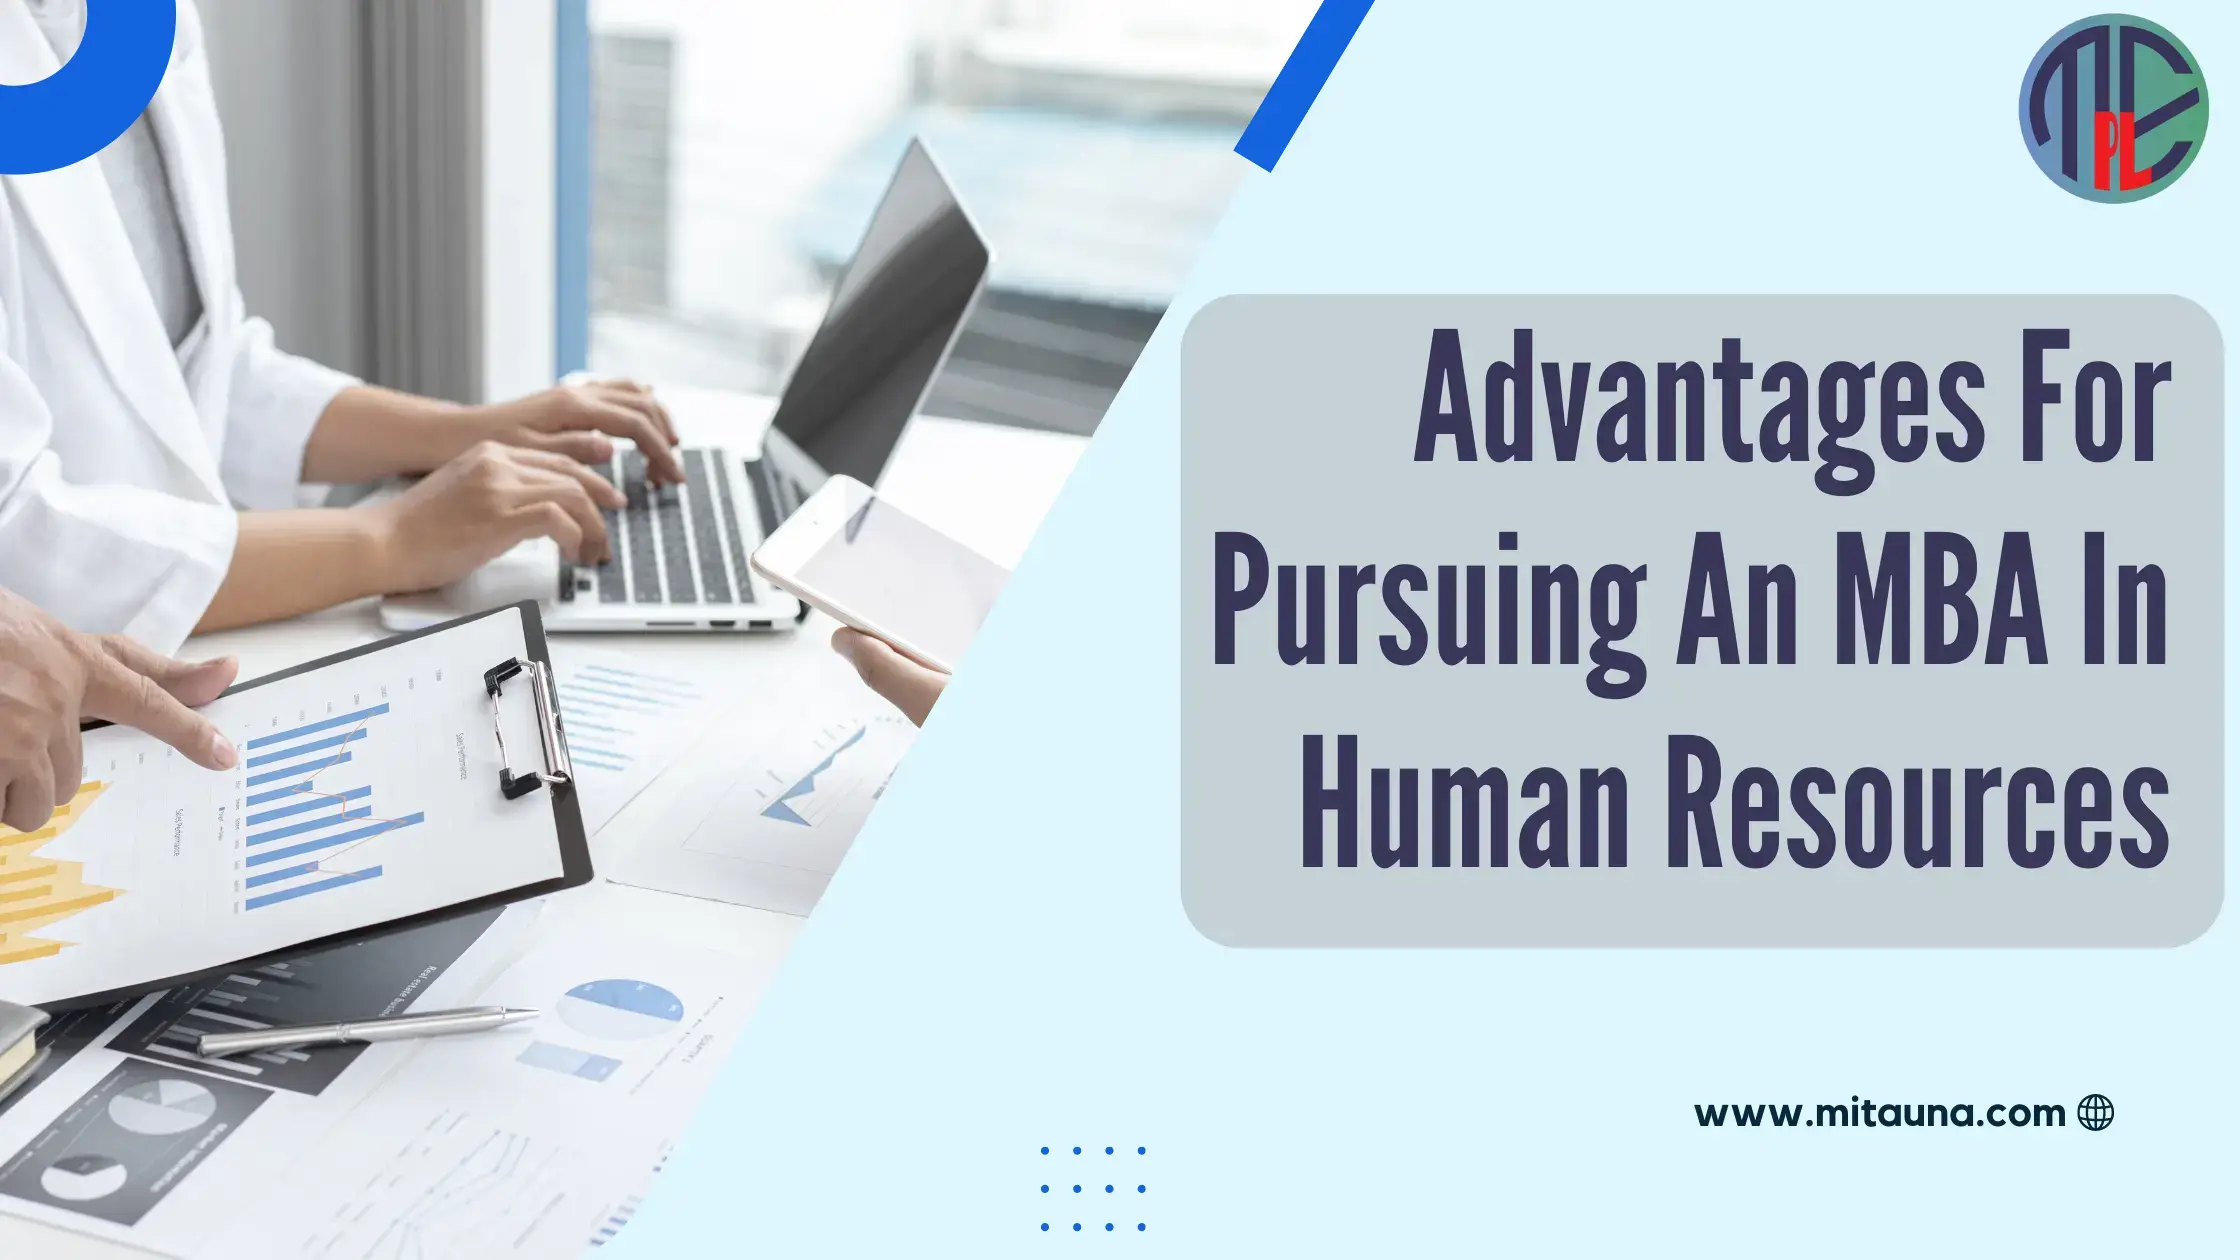 Top 5 advantages for pursuing an MBA in Human Resources